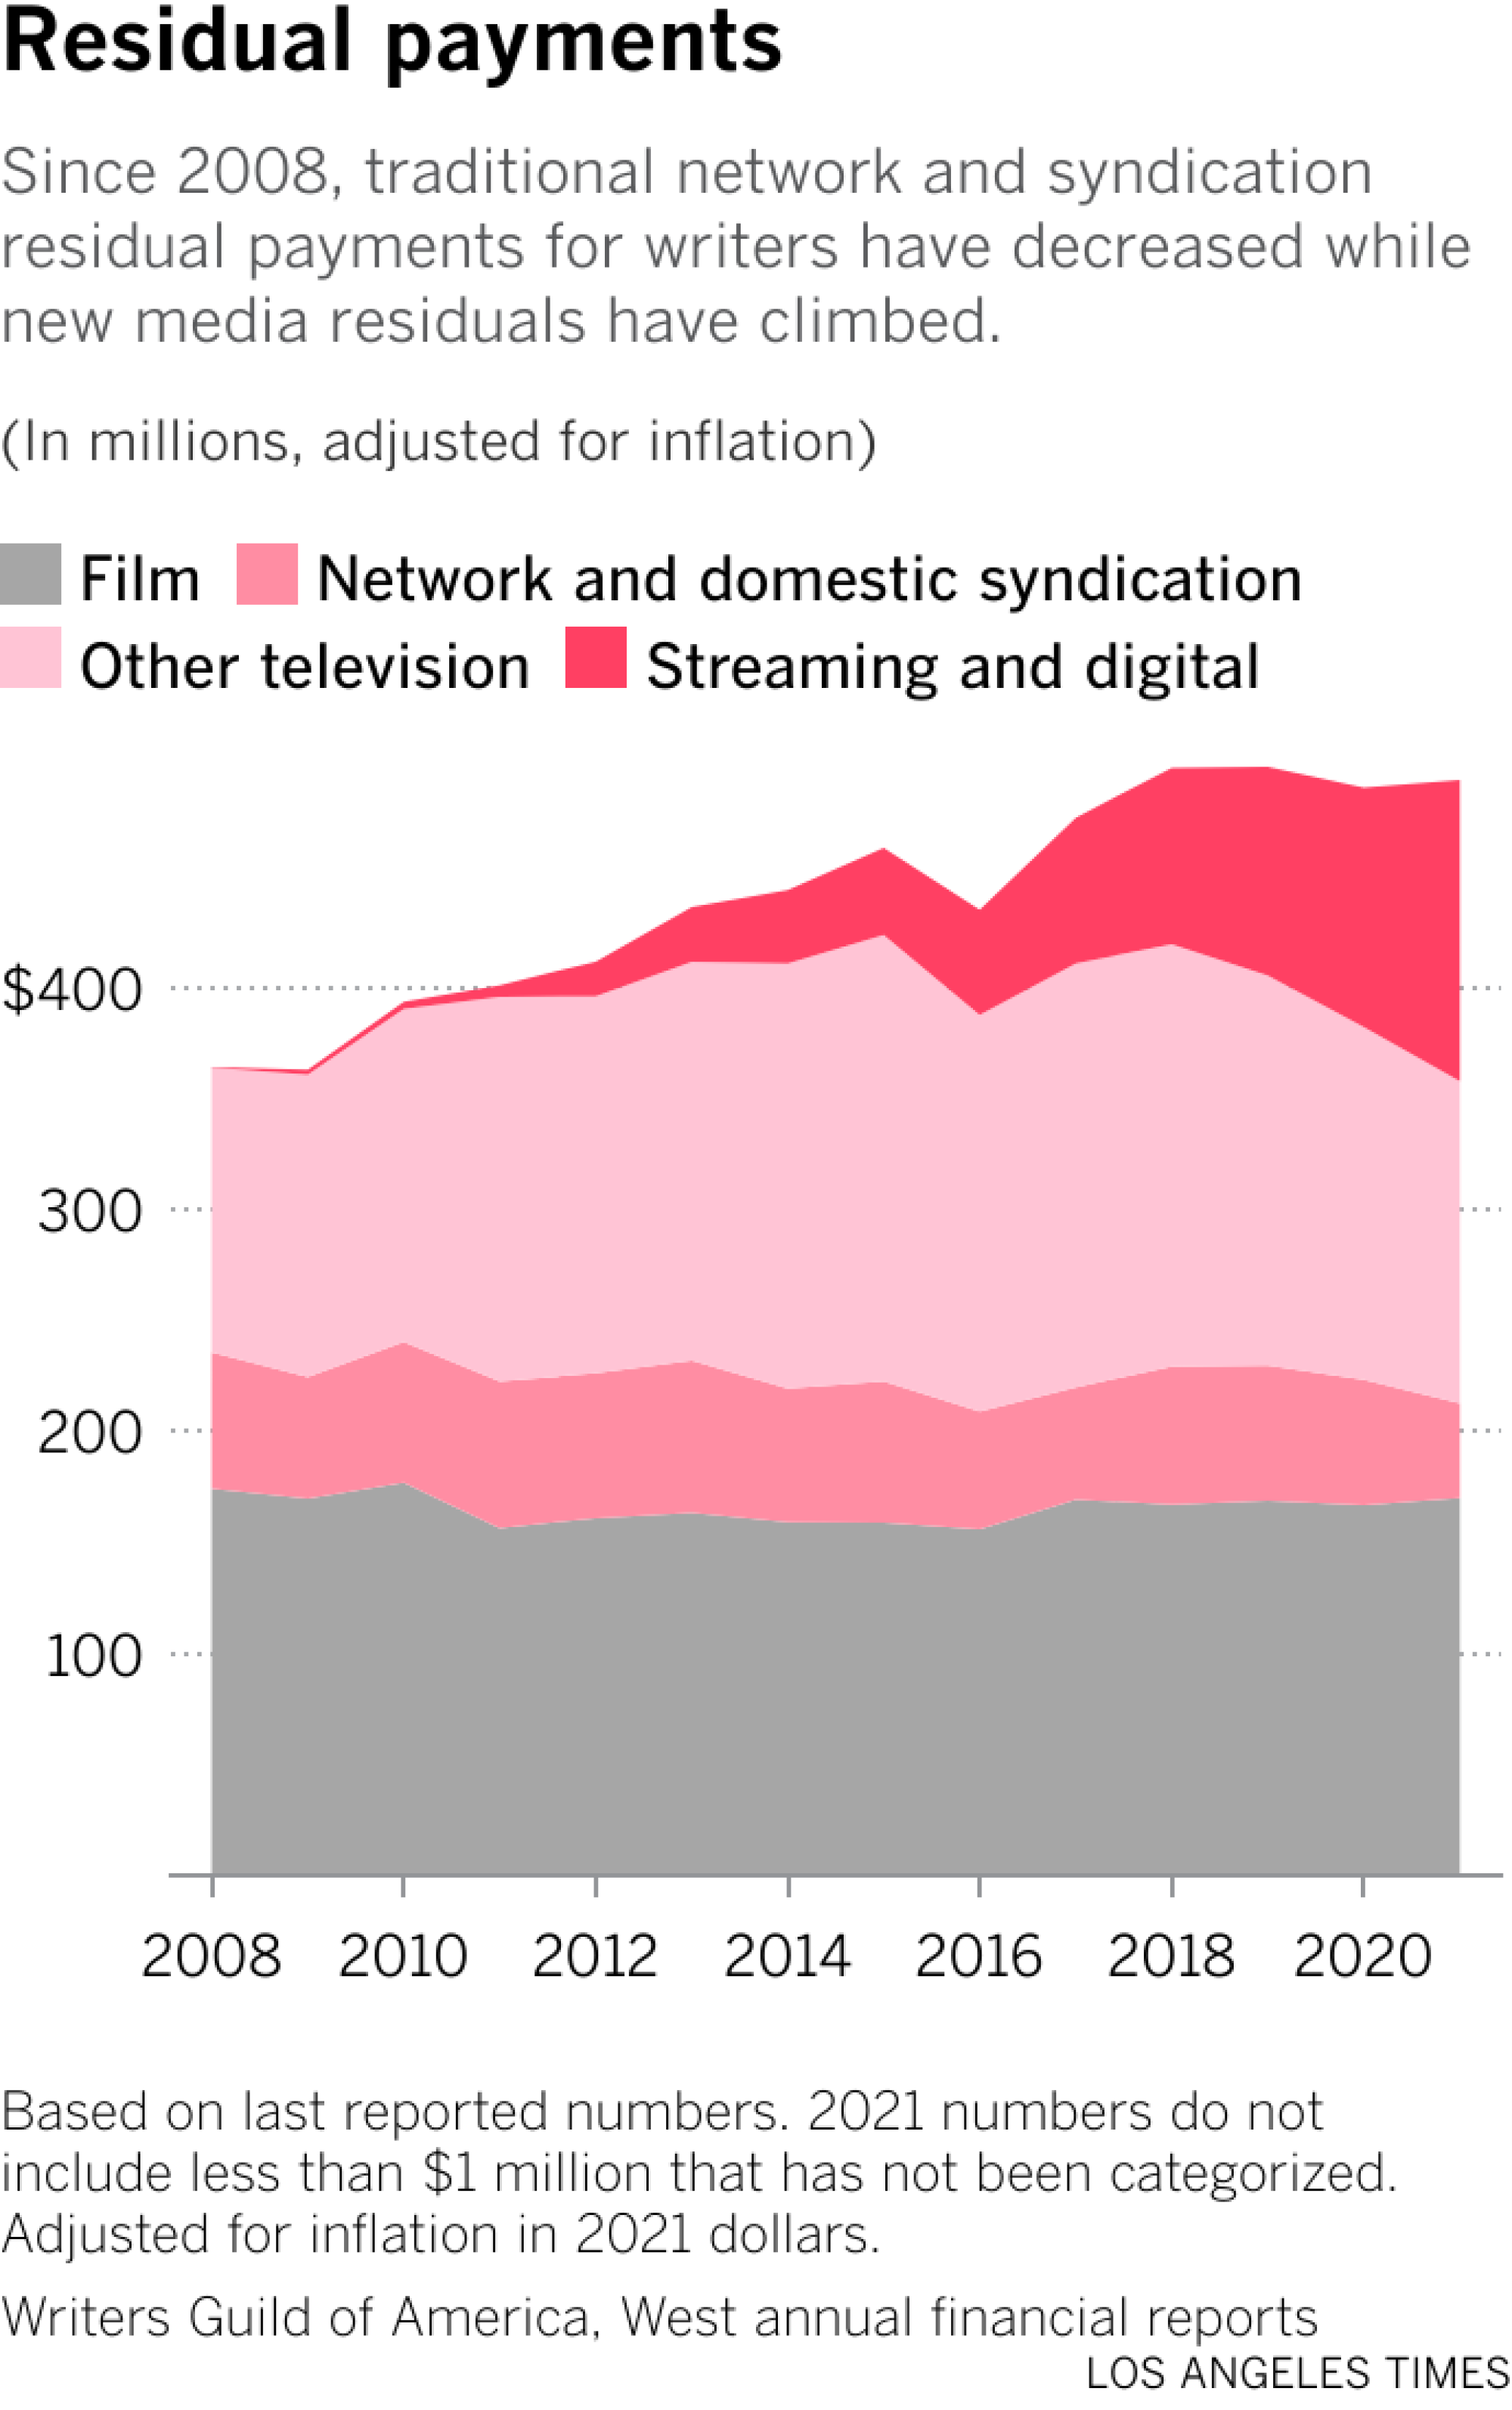 Since 2008, traditional network and syndication residual payments for writers have decreased while new media residuals have climbed.